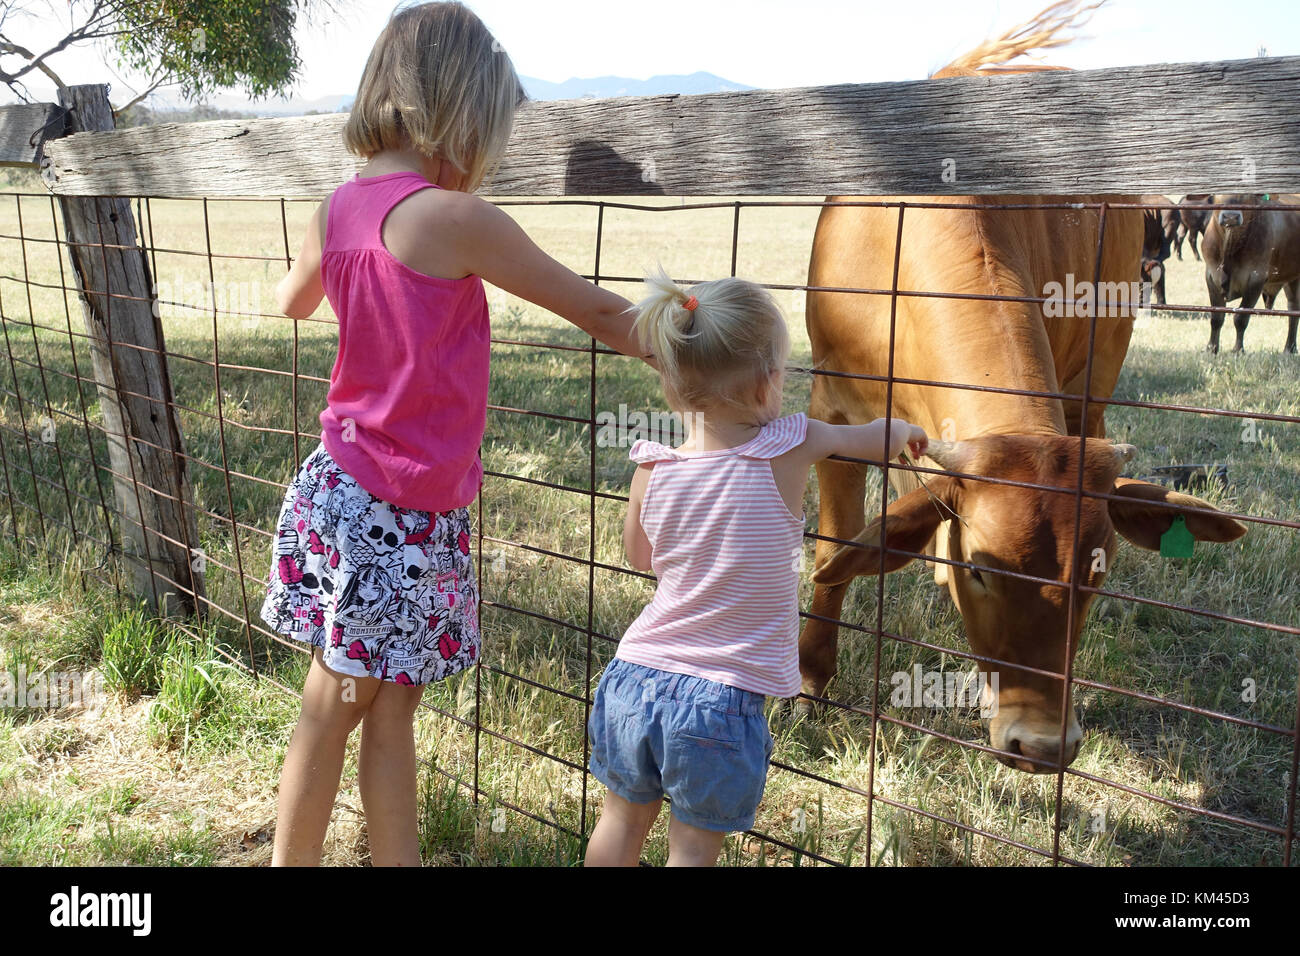 Two young girls looking at cattle. Stock Photo